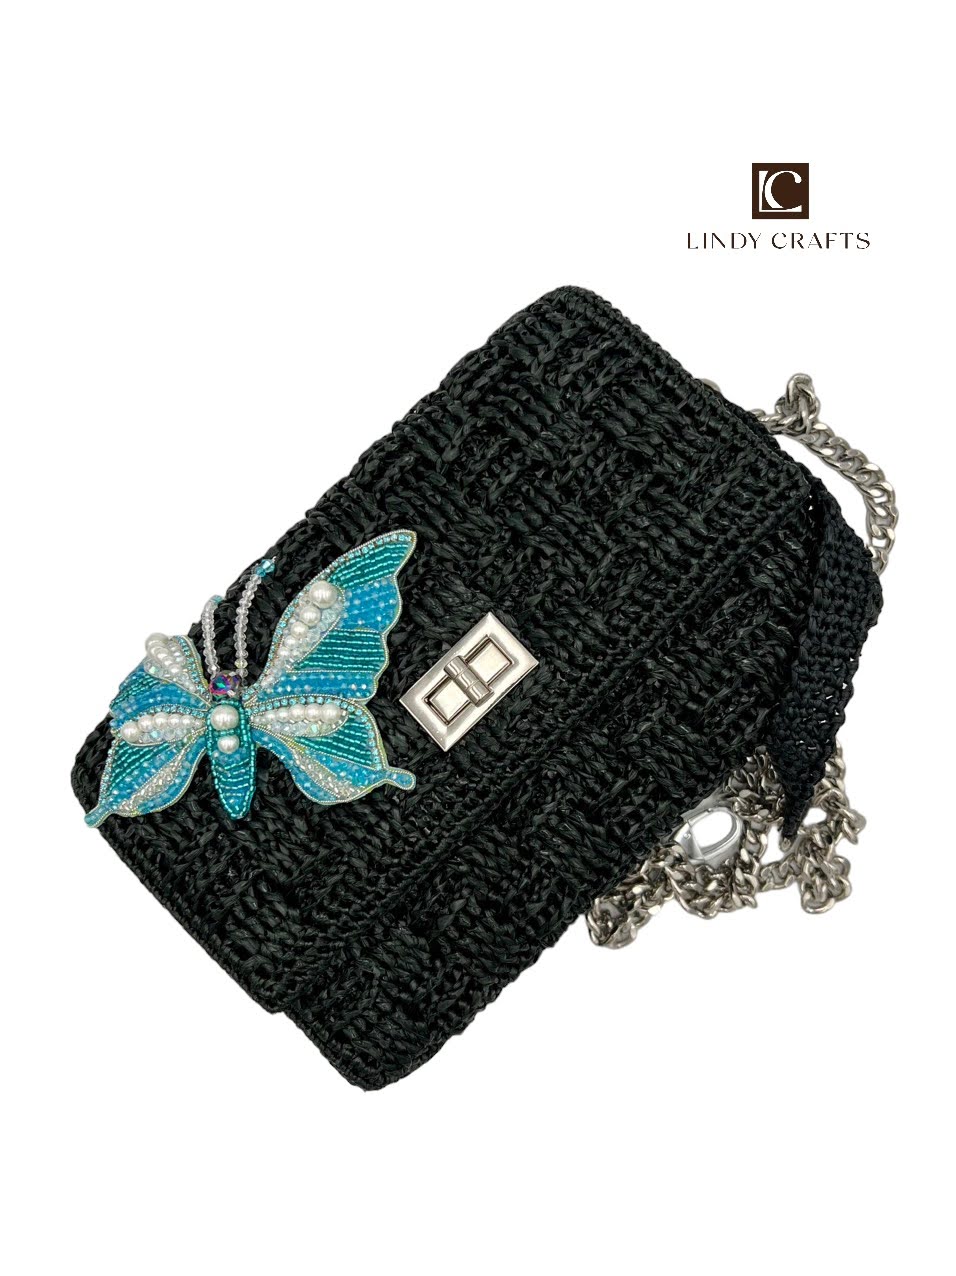 Butterfly Embellished Clutch - Made to order